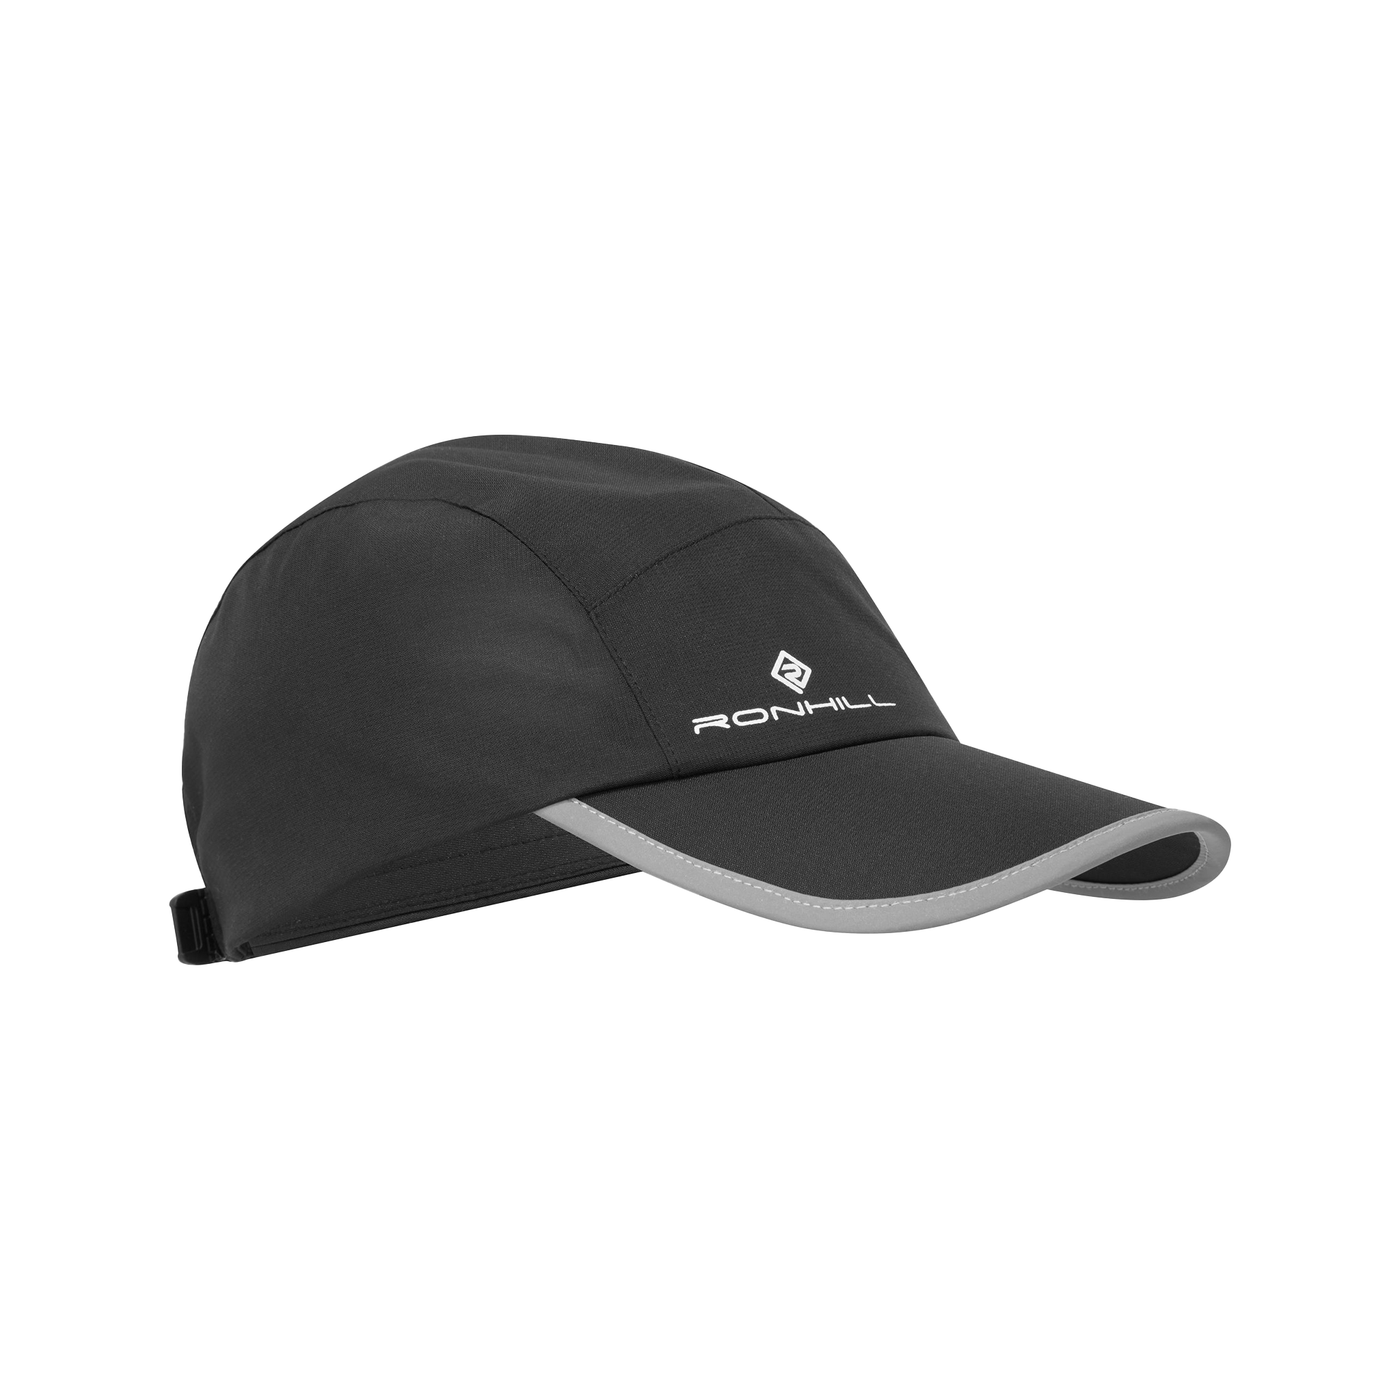 RonHill Fortify Cap - All Black